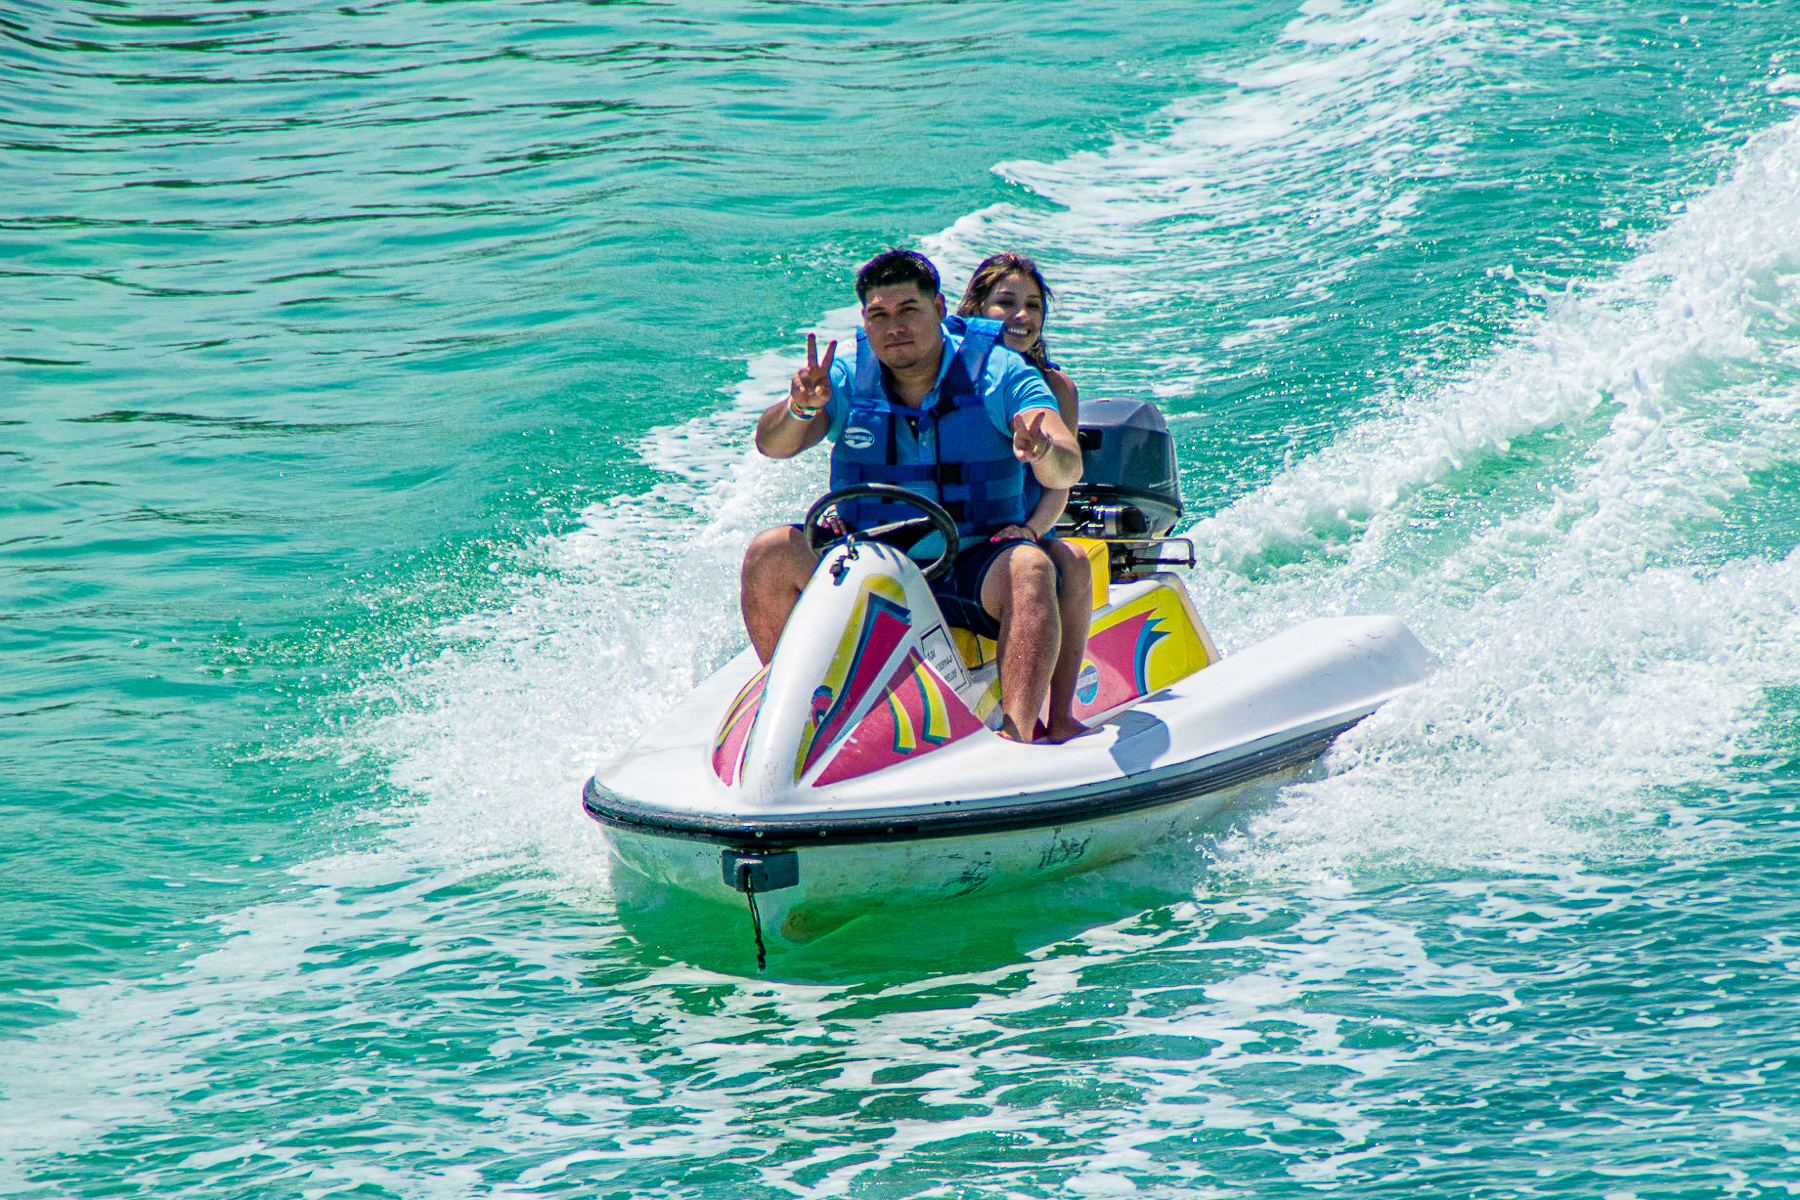 A couple of people on a JetSky doing the signature tour in Cancun, The Jungle Tour